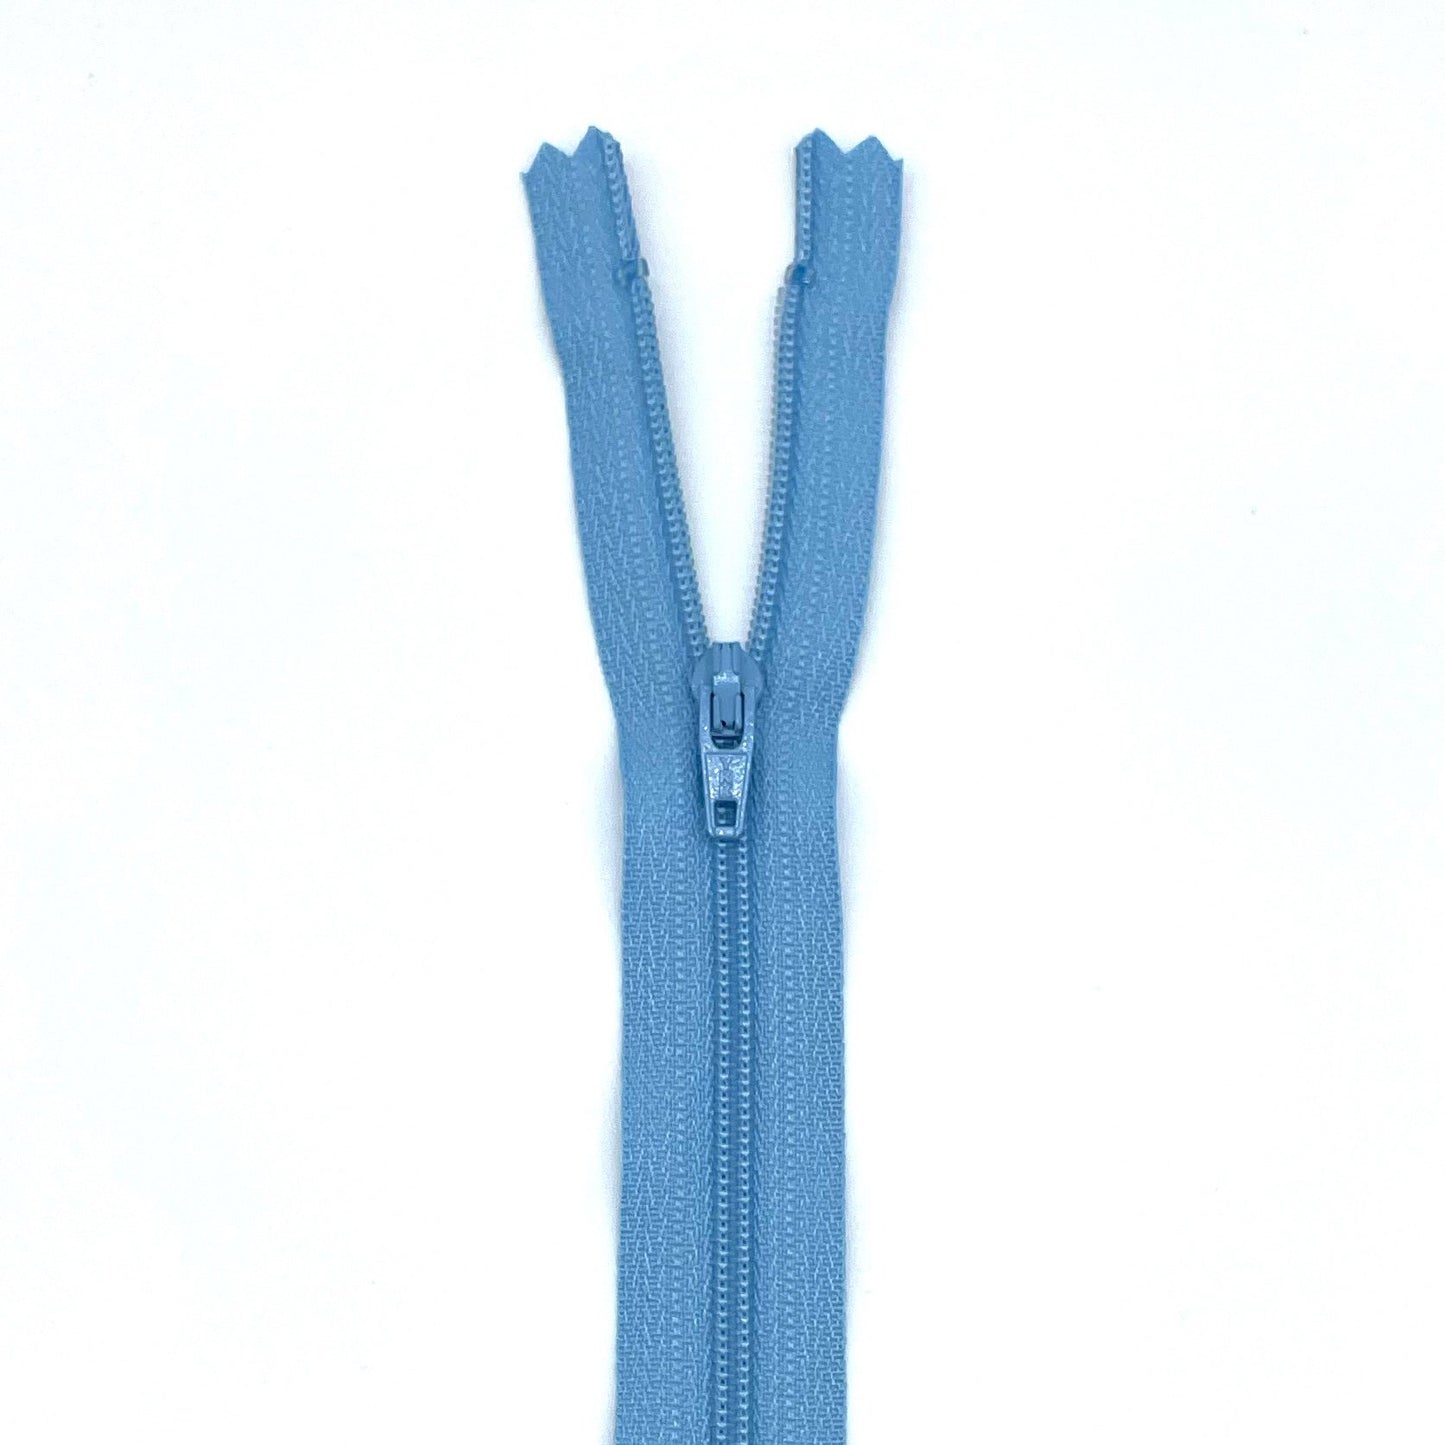 Skirt Zippers (up to 20cm/8")